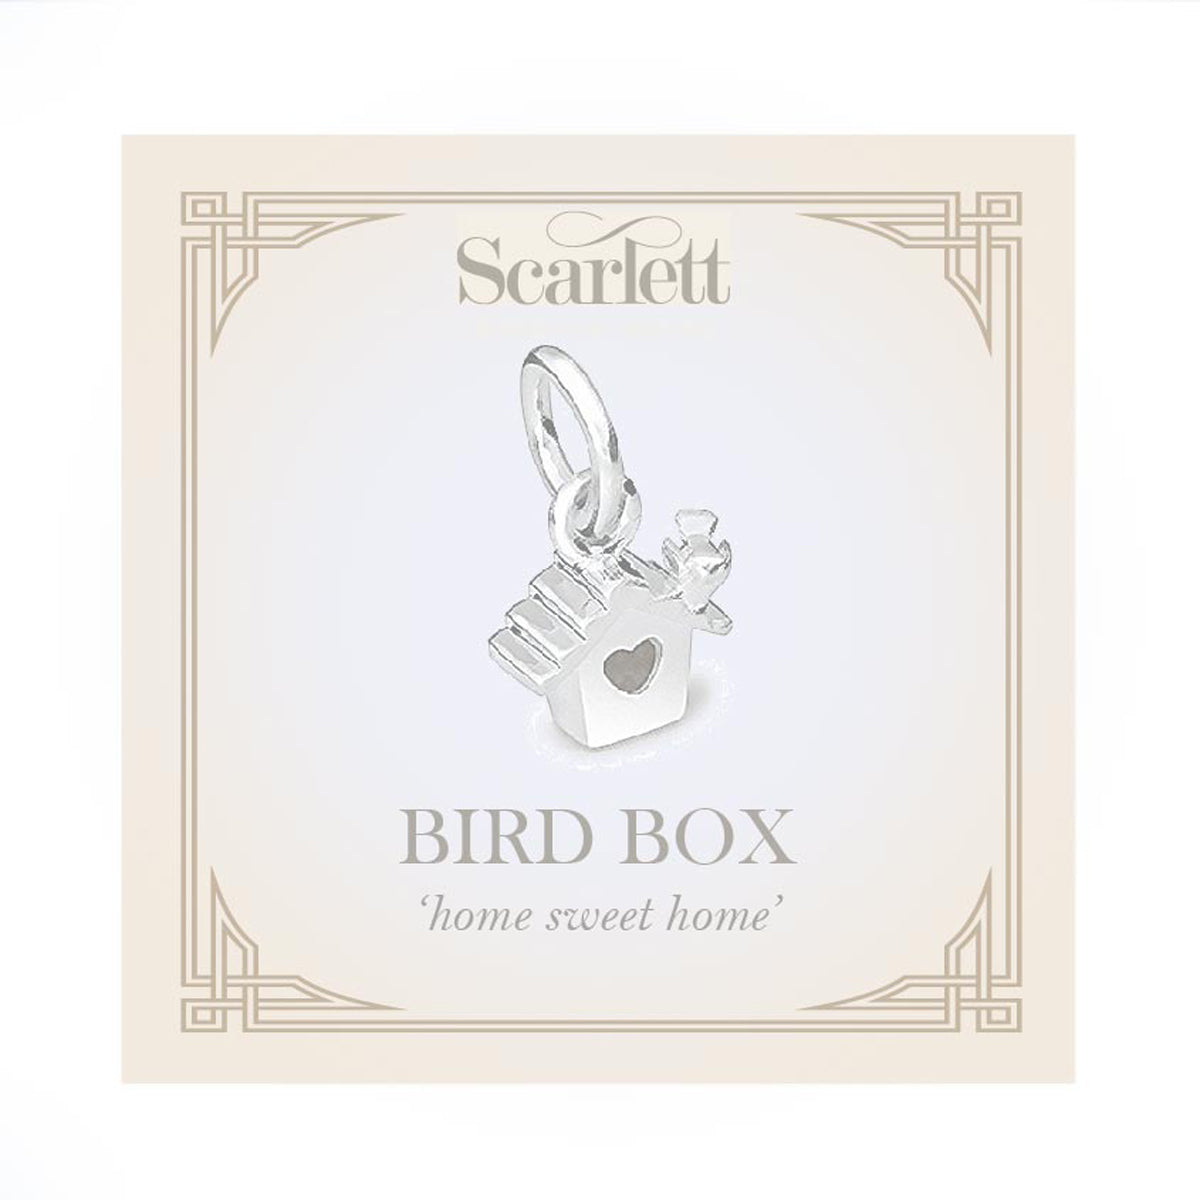 solid silver bird house charm with a heart shaped door and tiny bird FREE UK DELIVERY